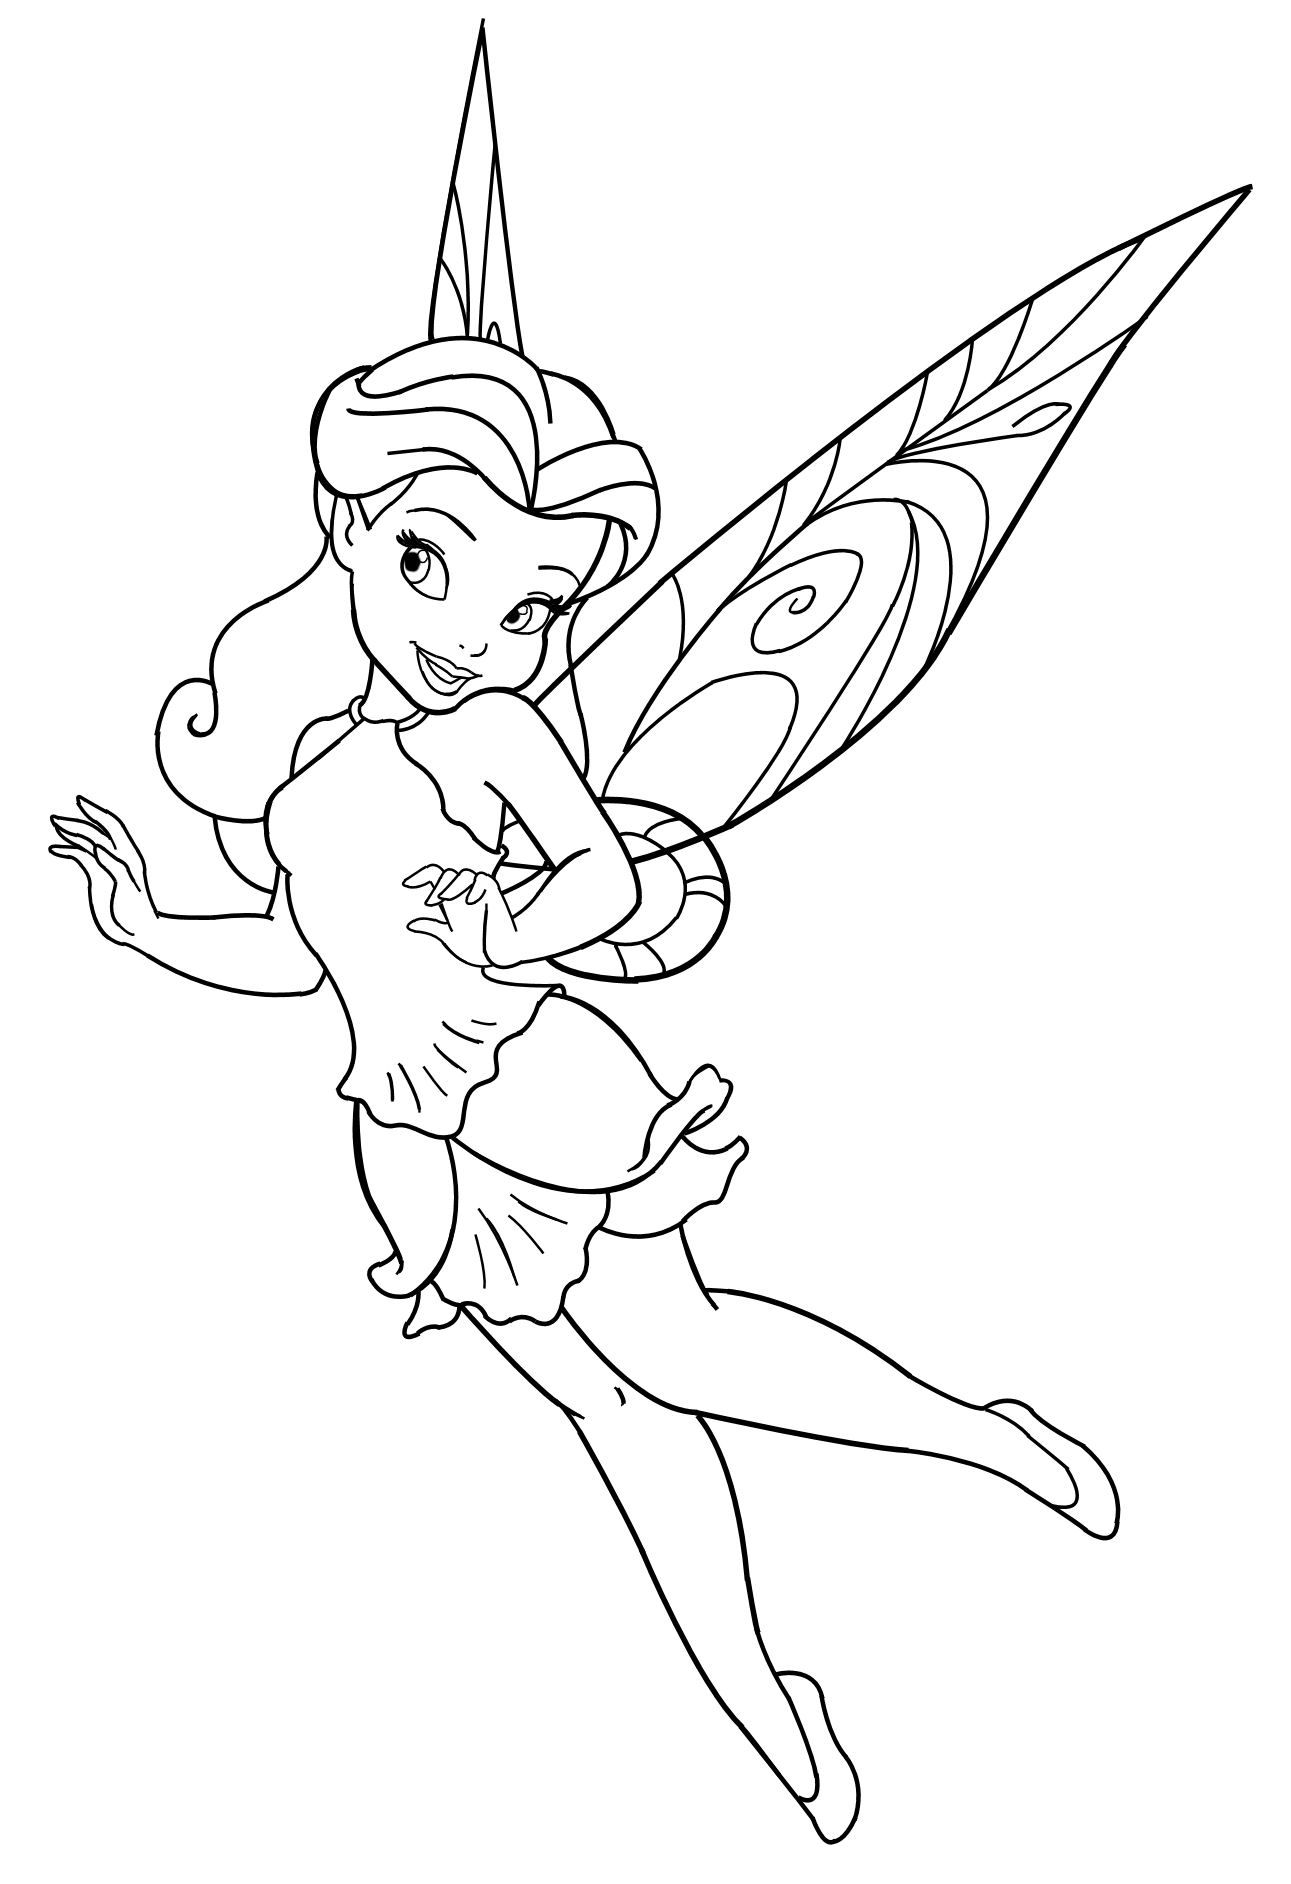 Rosetta. Colouring Page   Tinkerbell Coloring Pages, Fairy ...